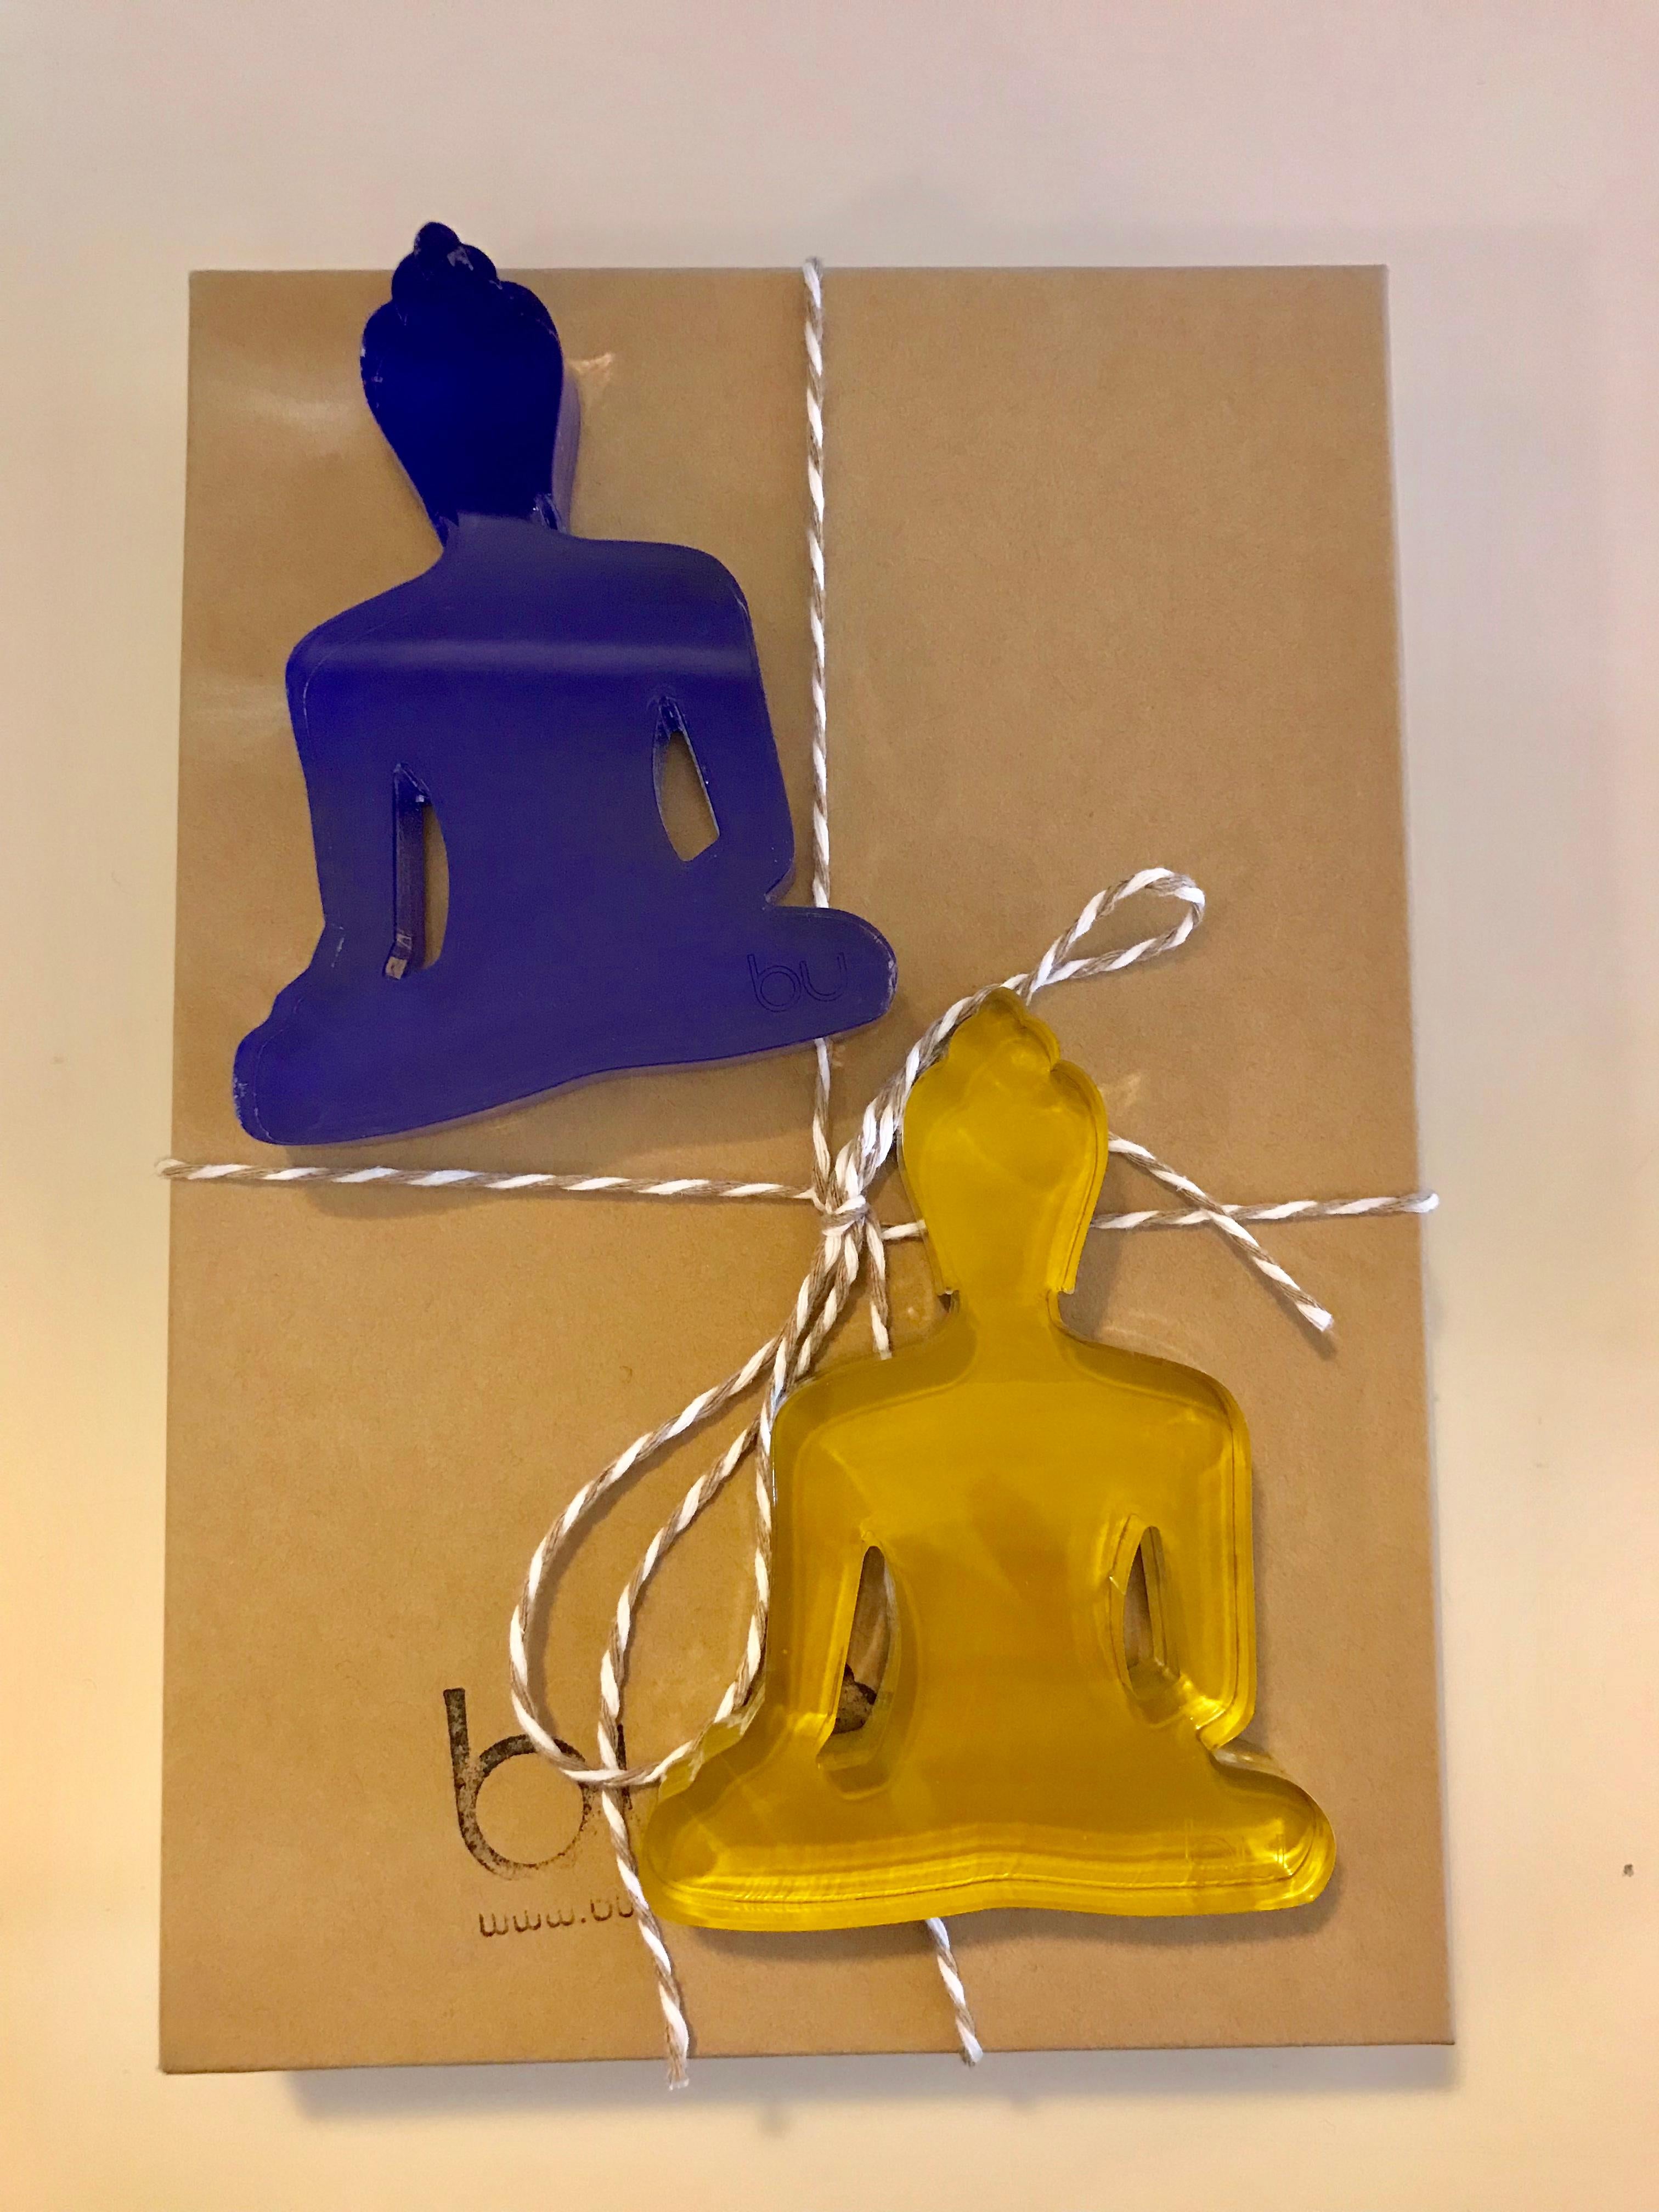 Buddha sculpture Duo (Blue and Gold Buddhas) - Contemporary Sculpture by Tal Nehoray